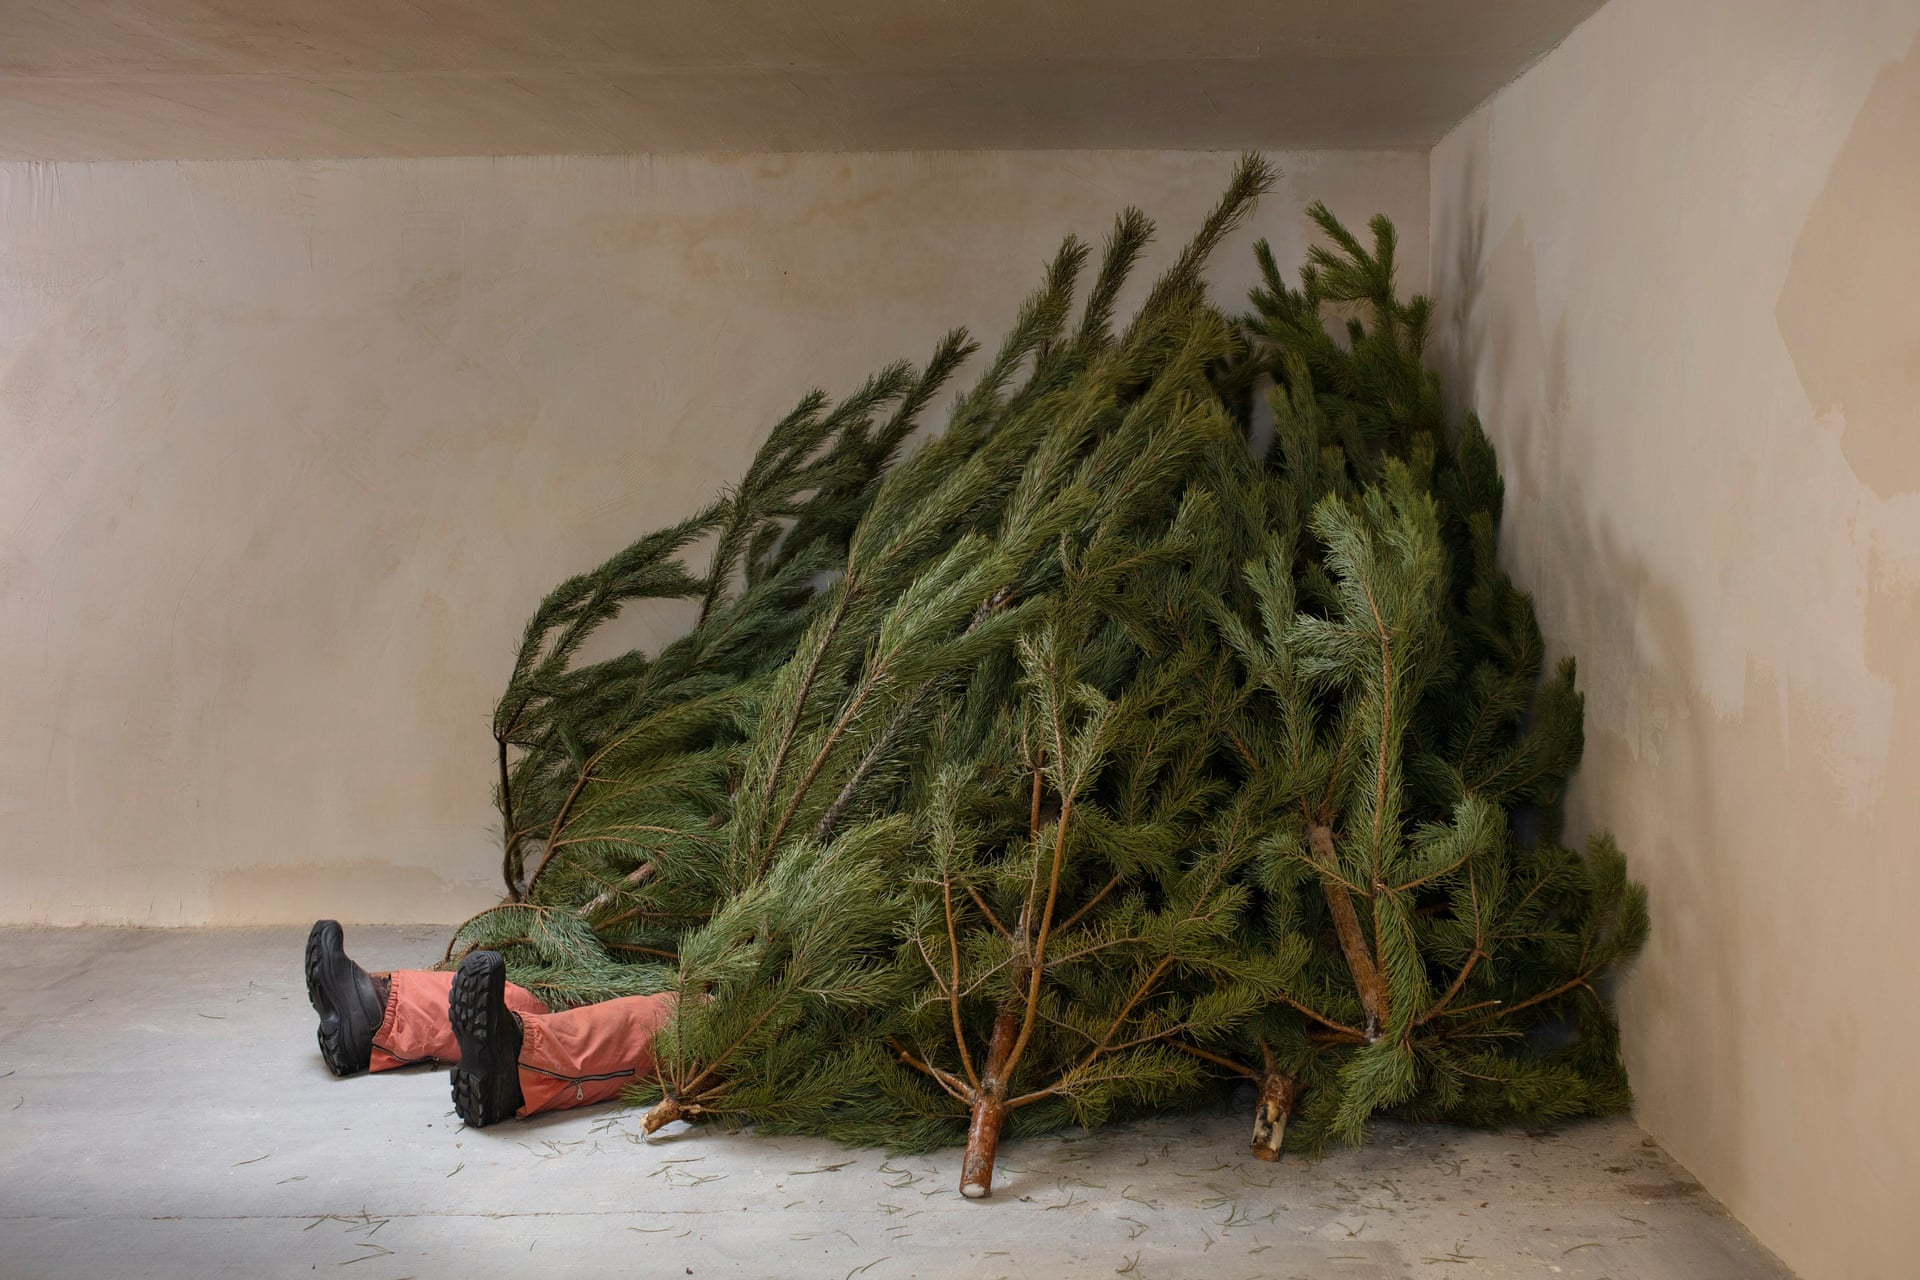 Prozac: Self-Portrait with Christmas Trees. "In his parents’ basement, he lies buried under a pile of Christmas trees that were briefly admired but then thrown away, no longer wanted. This is how the new year begins for them"